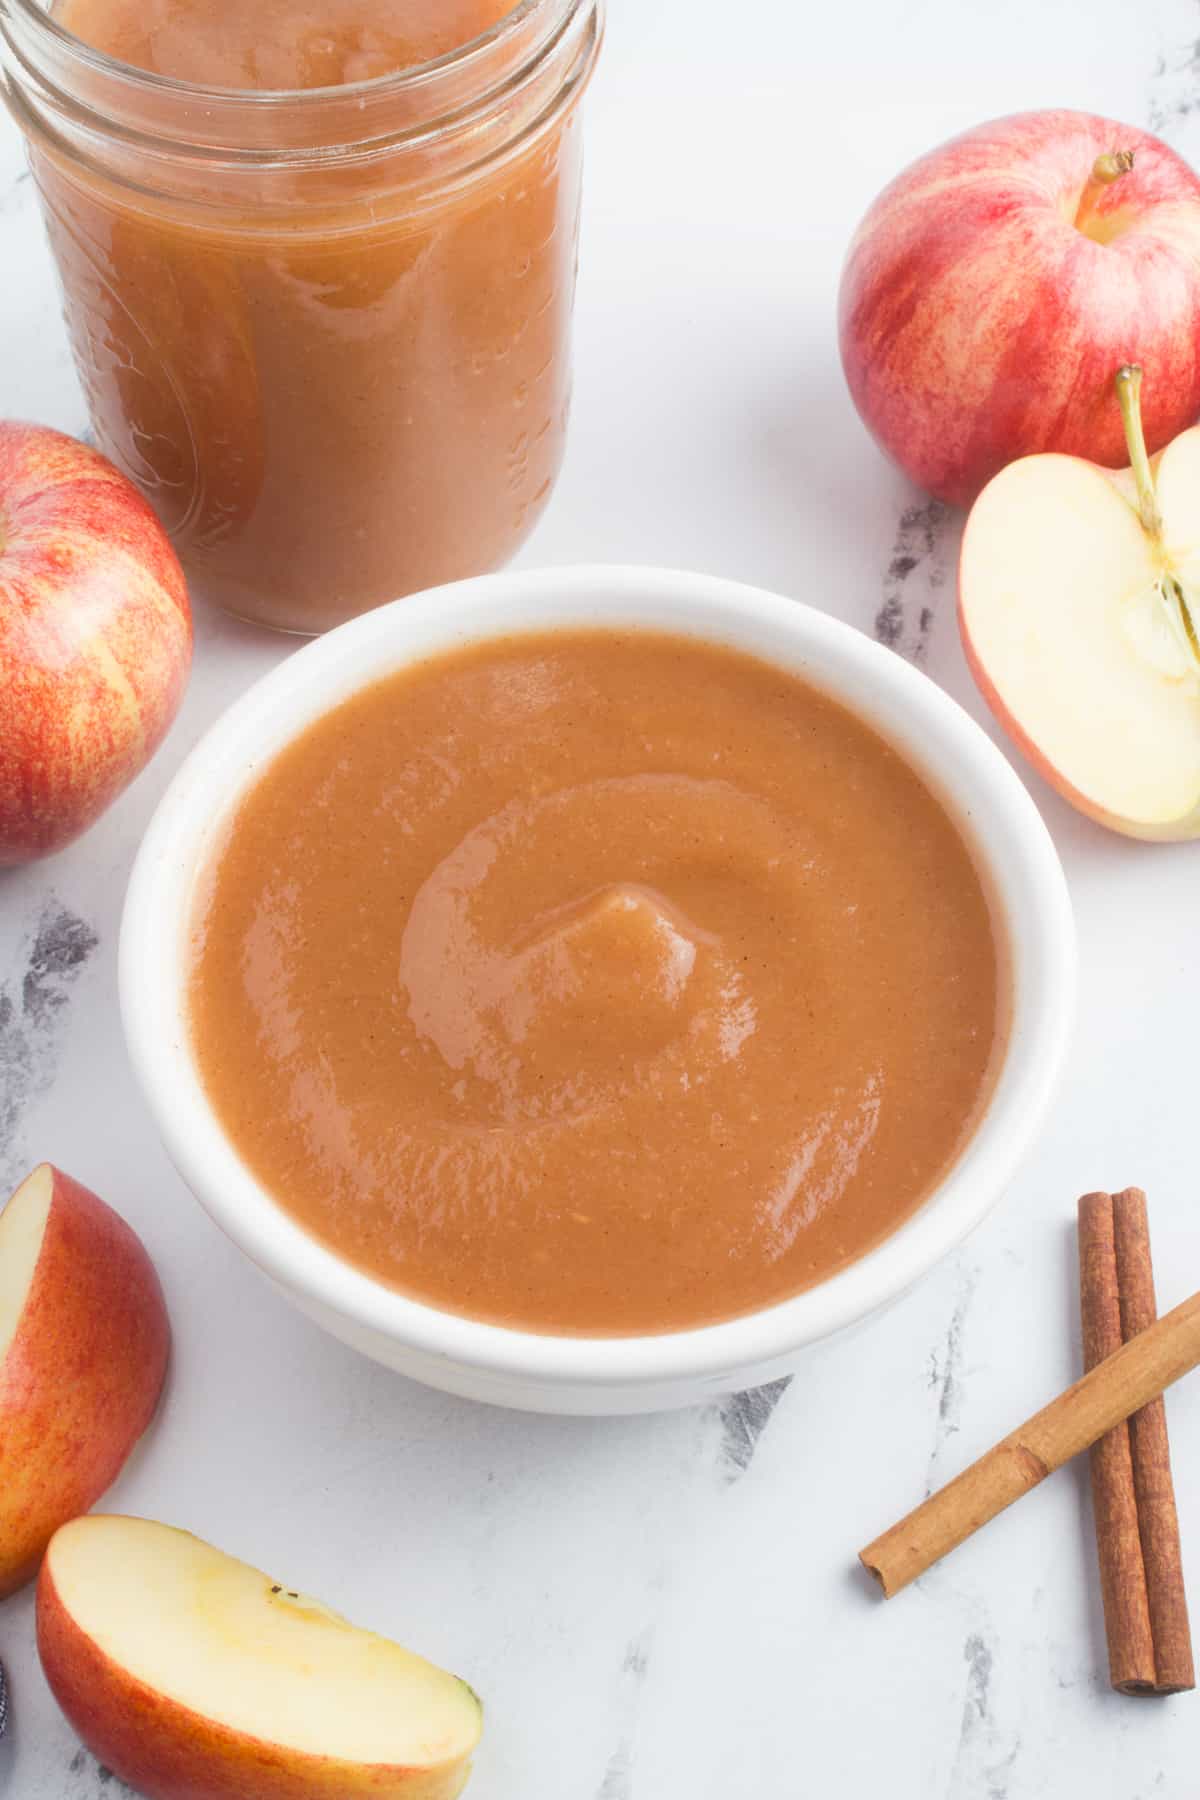 A bowl of freshly made applesauce is the centerpiece of the image. Red apples surround the bowl, and two cinnamon sticks rest nearby. A mason jar filled with more applesauce suggests that there is plenty of this delicious homemade treat to go around.